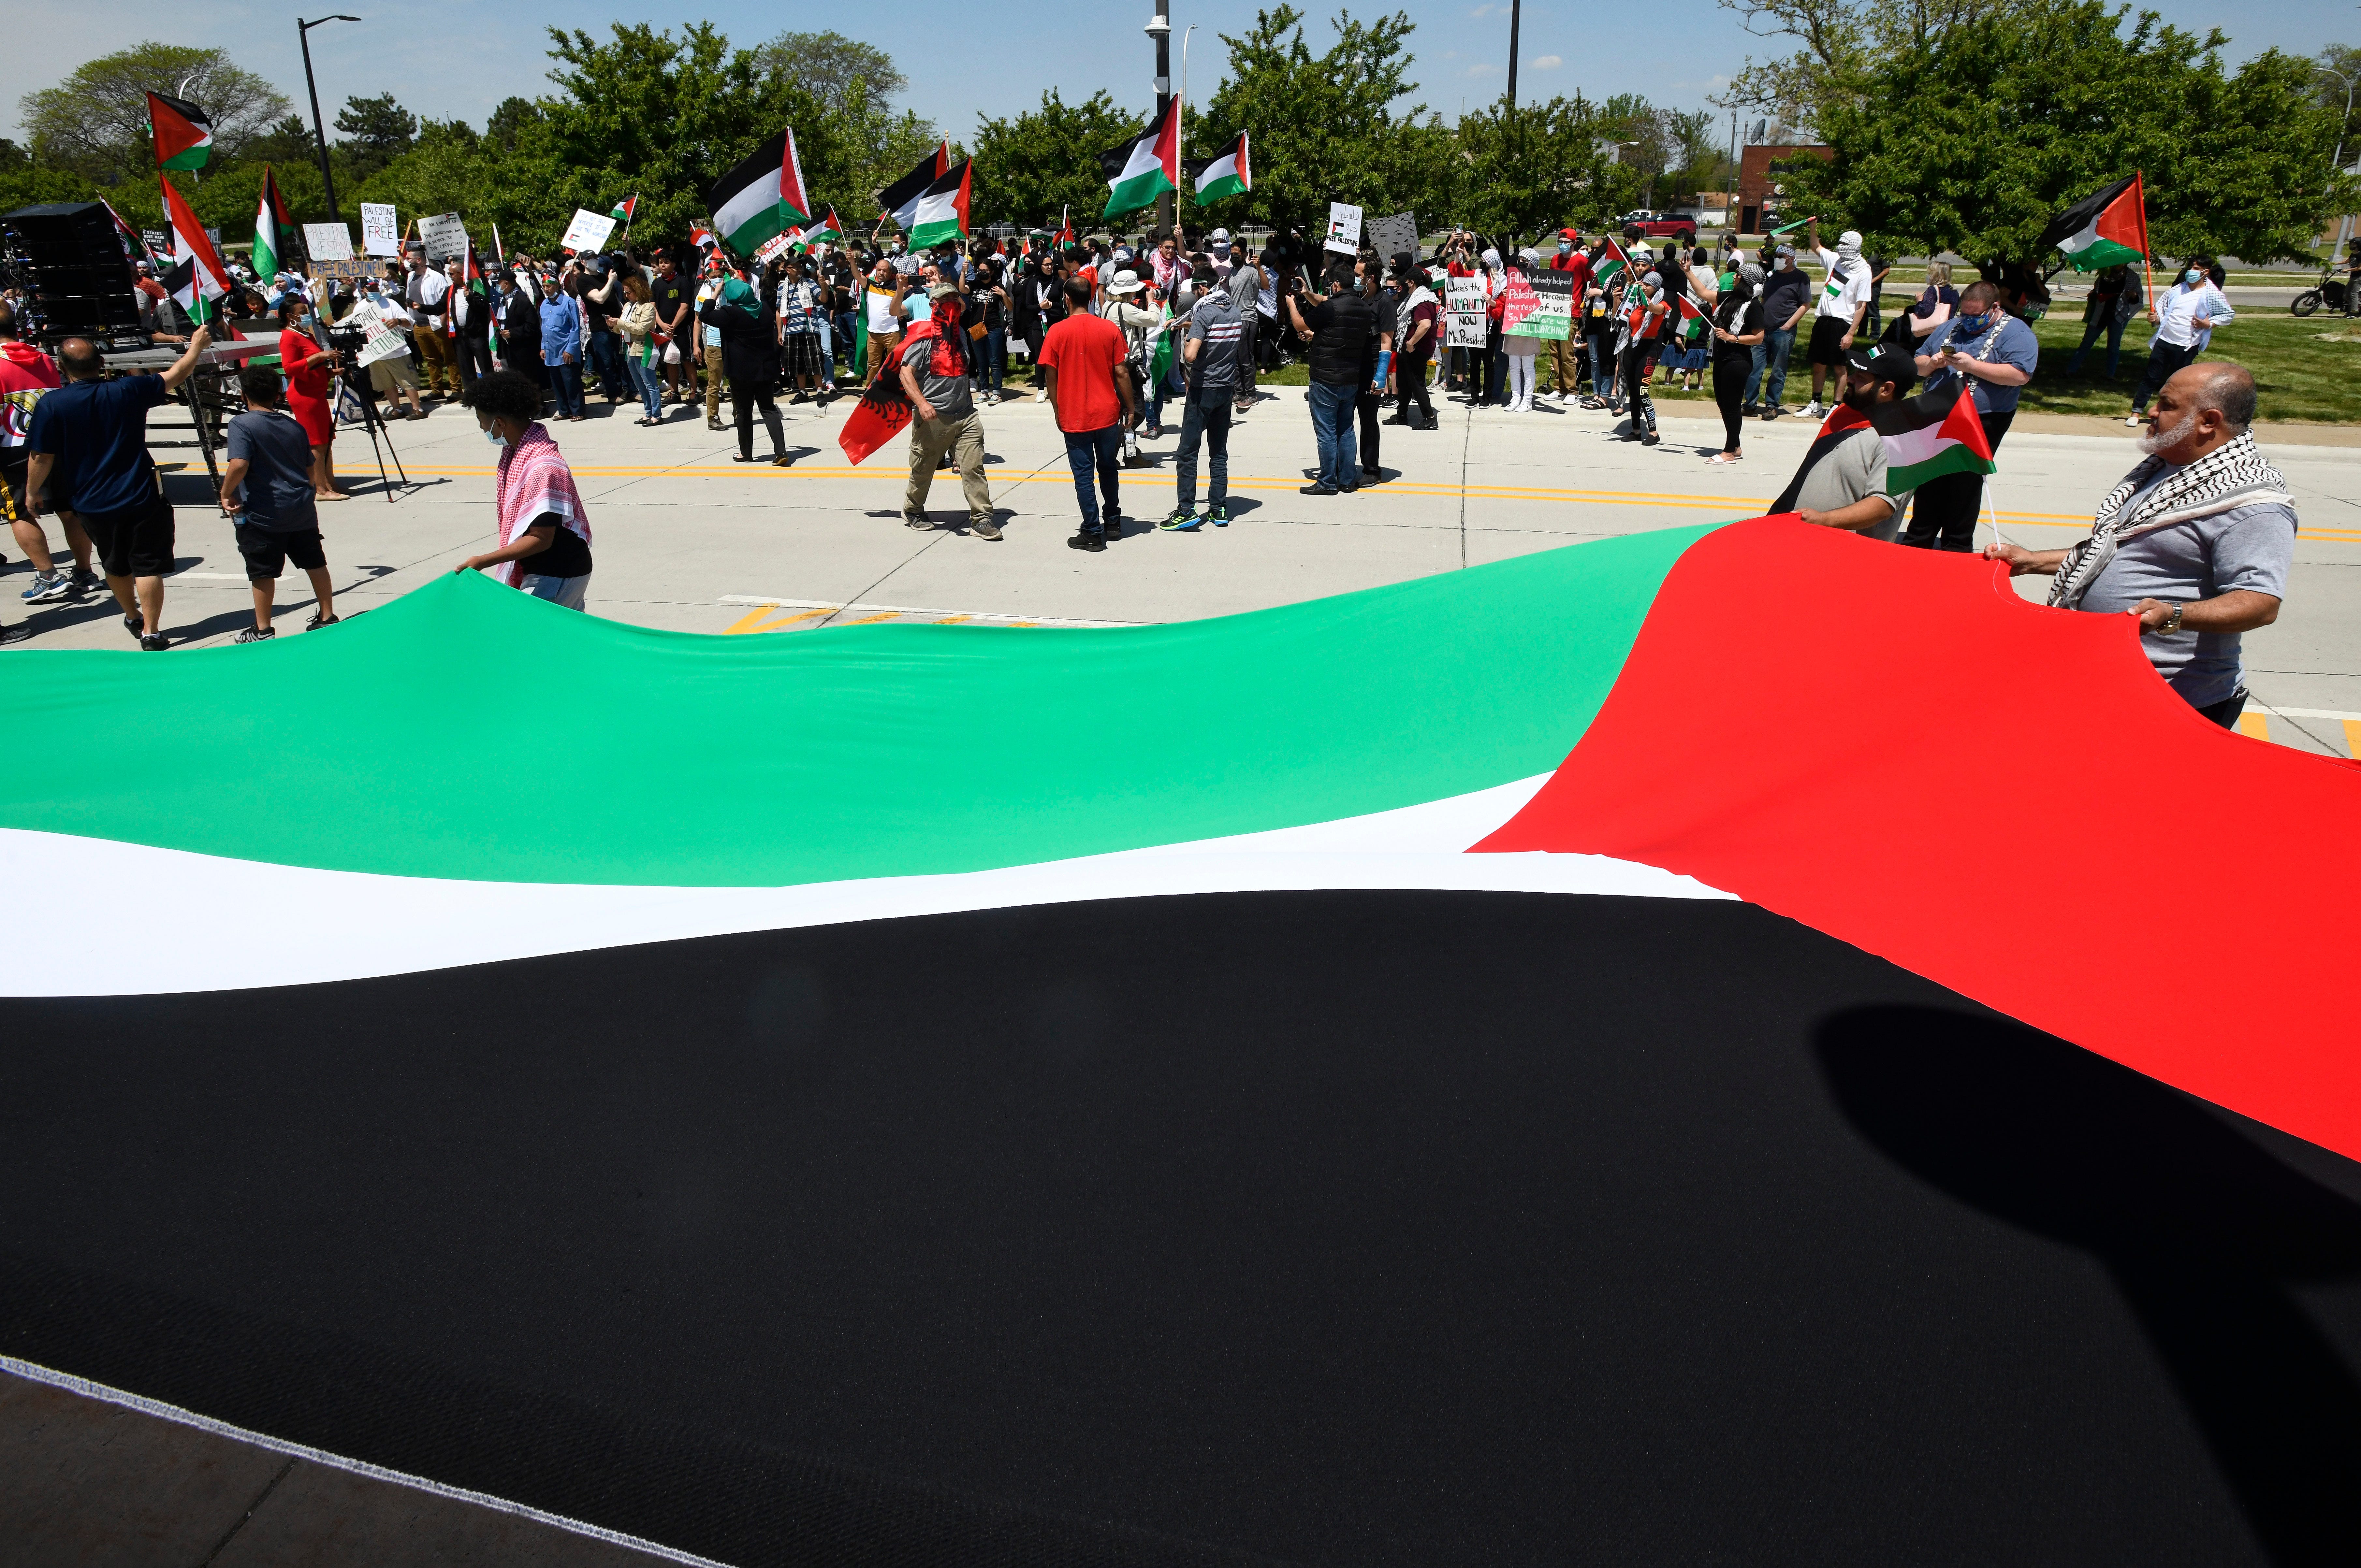 A huge Palestinian flag amongst the thousands of protestors at a Palestinian protest and march, at the same time President Joe Biden is visiting in another part of Dearborn, Michigan on May 18, 2021. (Image by Daniel Mears/ The Detroit News)